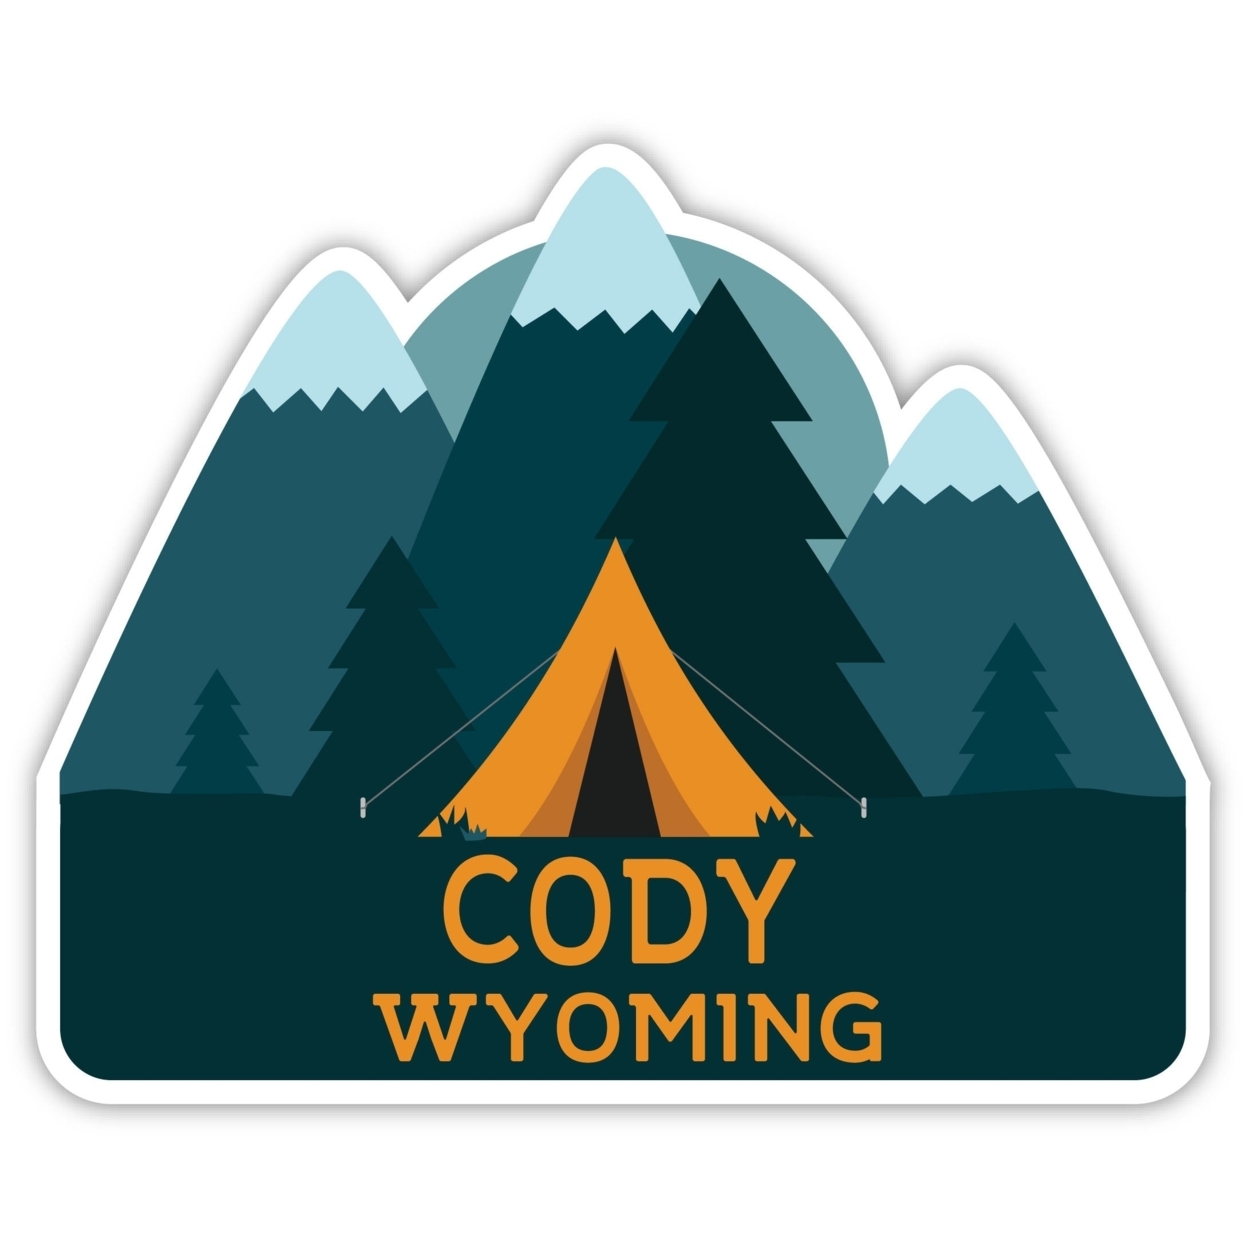 Cody Wyoming Souvenir Decorative Stickers (Choose Theme And Size) - Single Unit, 4-Inch, Tent